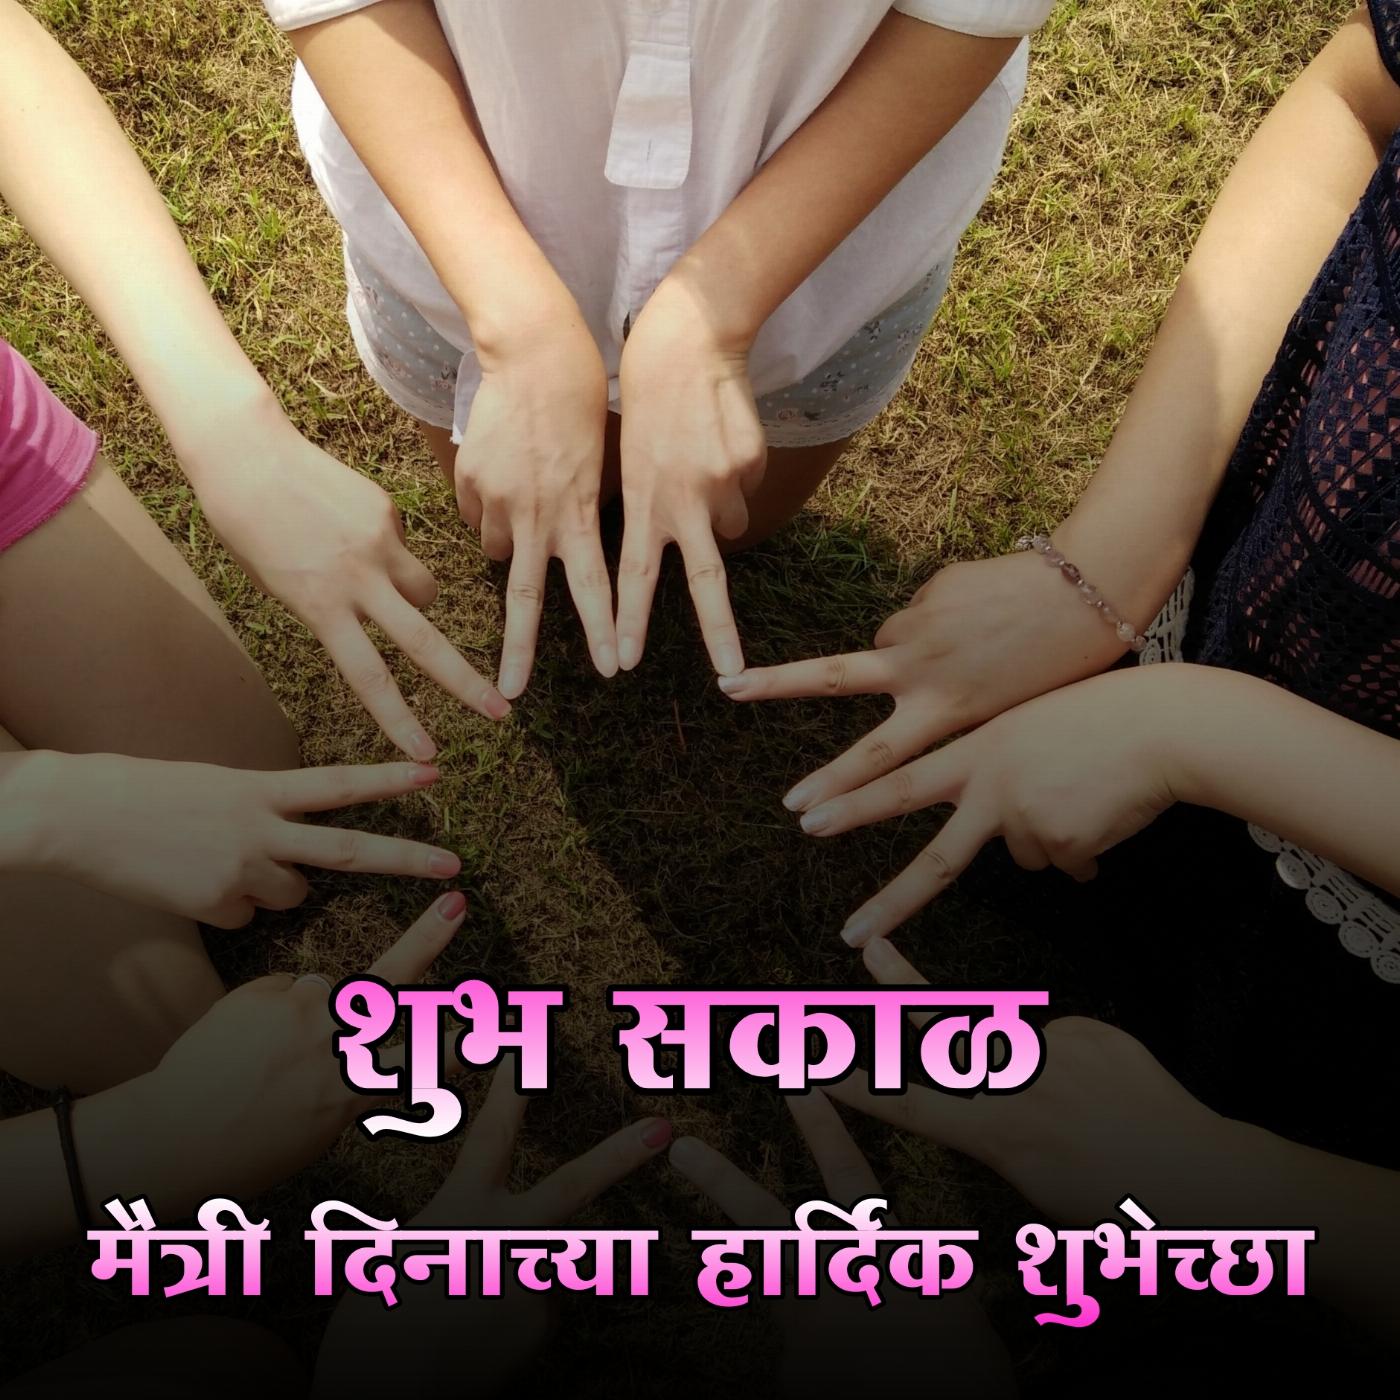 Good Morning Happy Friendship Day Images in Marathi